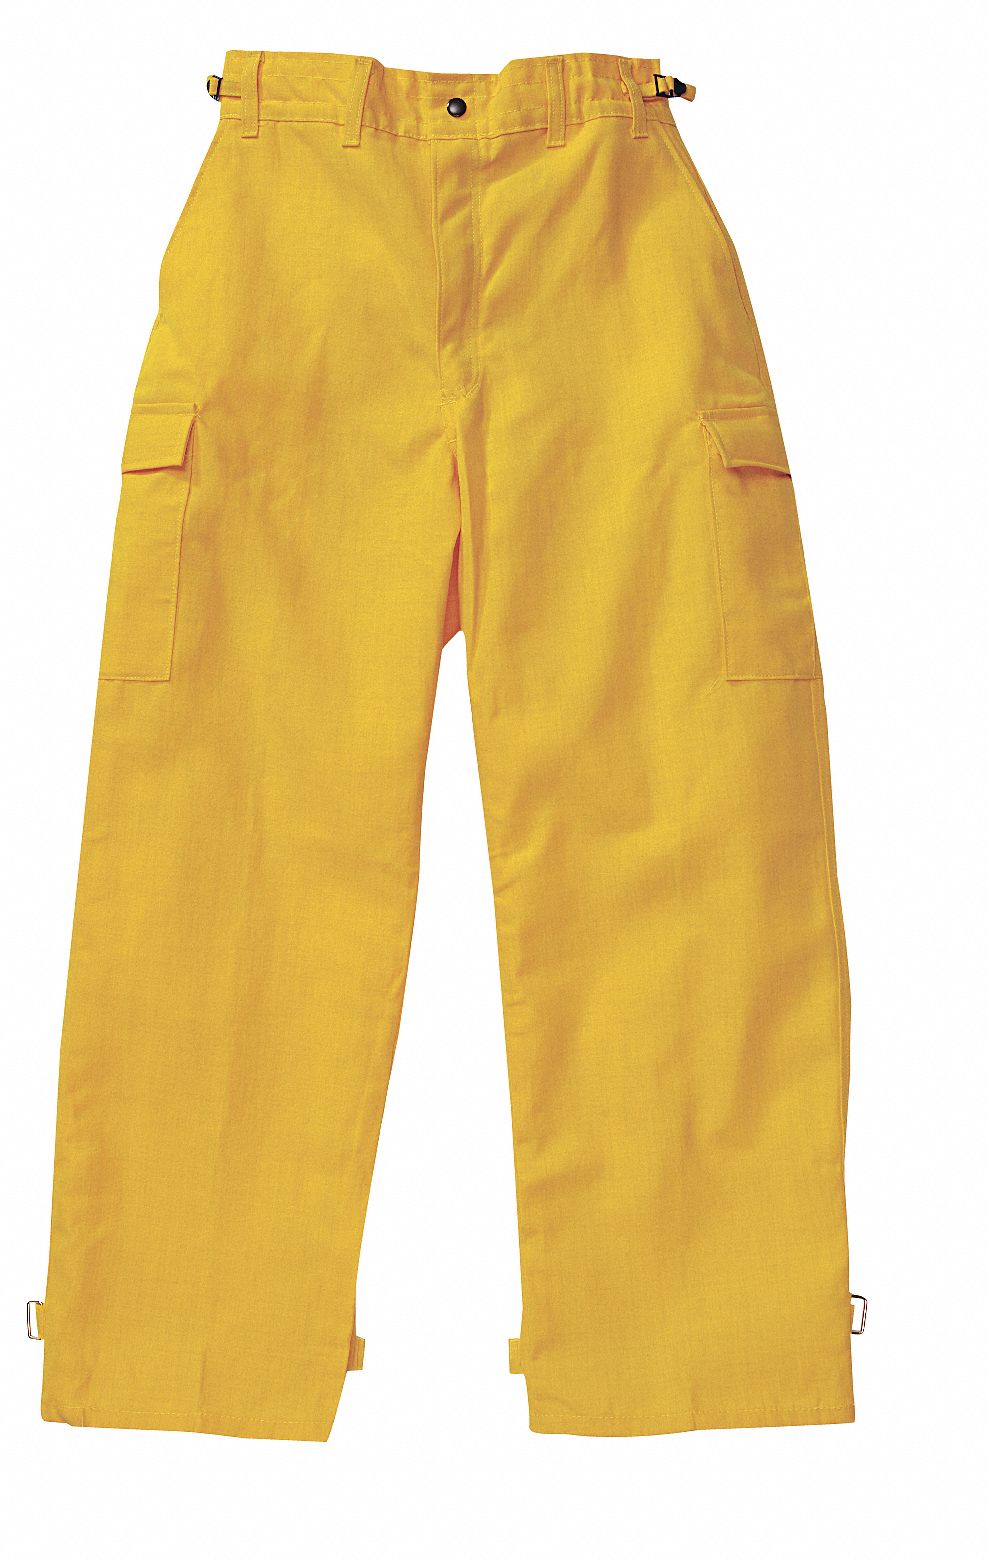 Wildland Fire Over Pants: M, 31 to 35 in Fits Waist Size, 34 in Inseam, Yellow